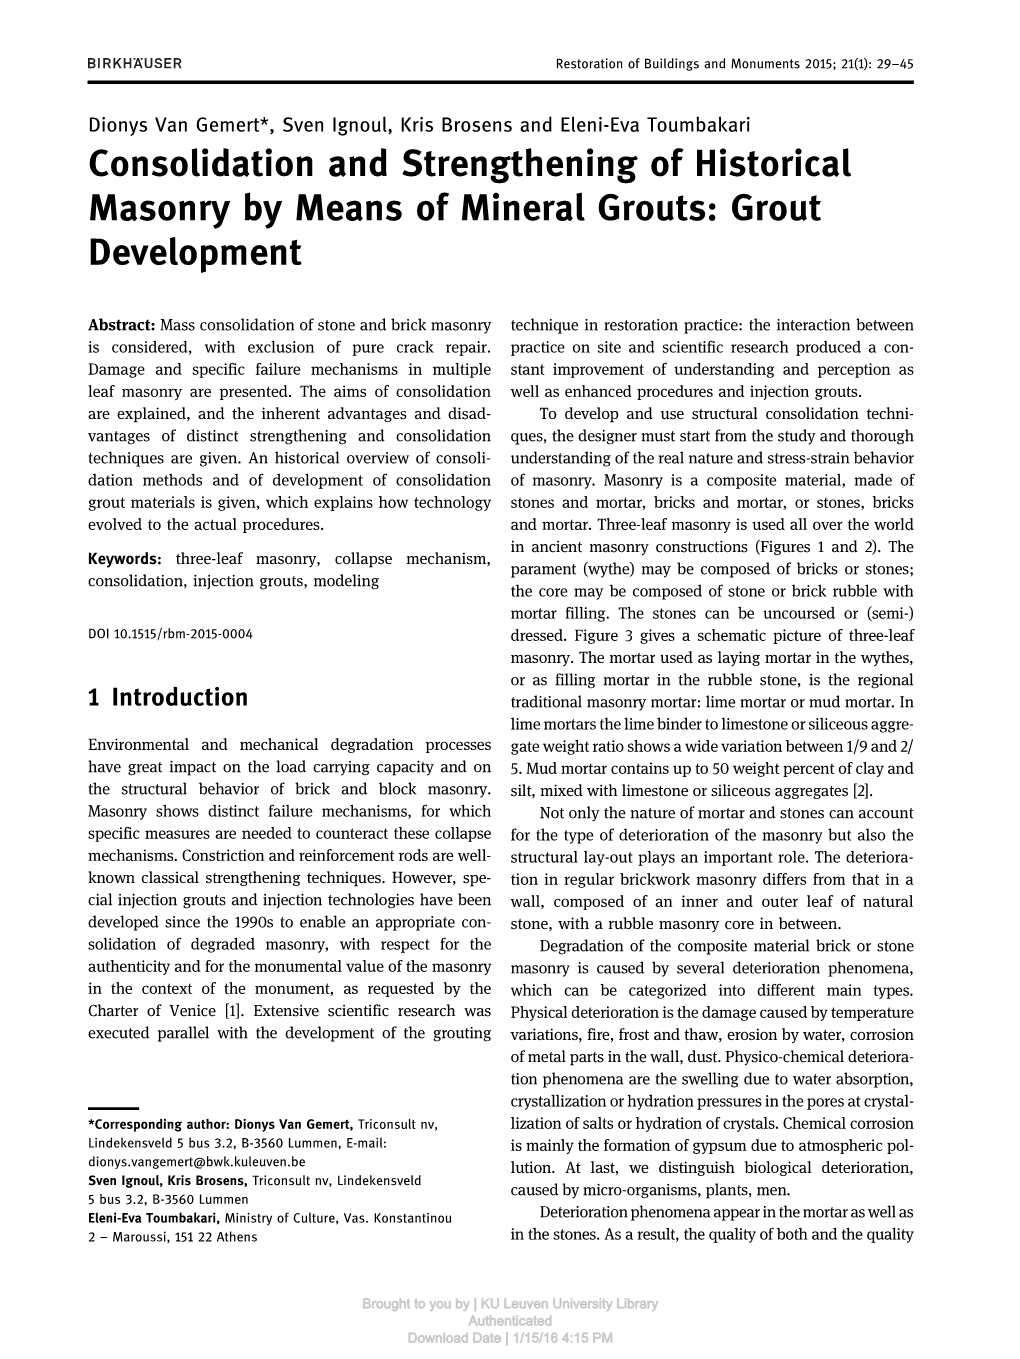 Consolidation and Strengthening of Historical Masonry by Means of Mineral Grouts: Grout Development